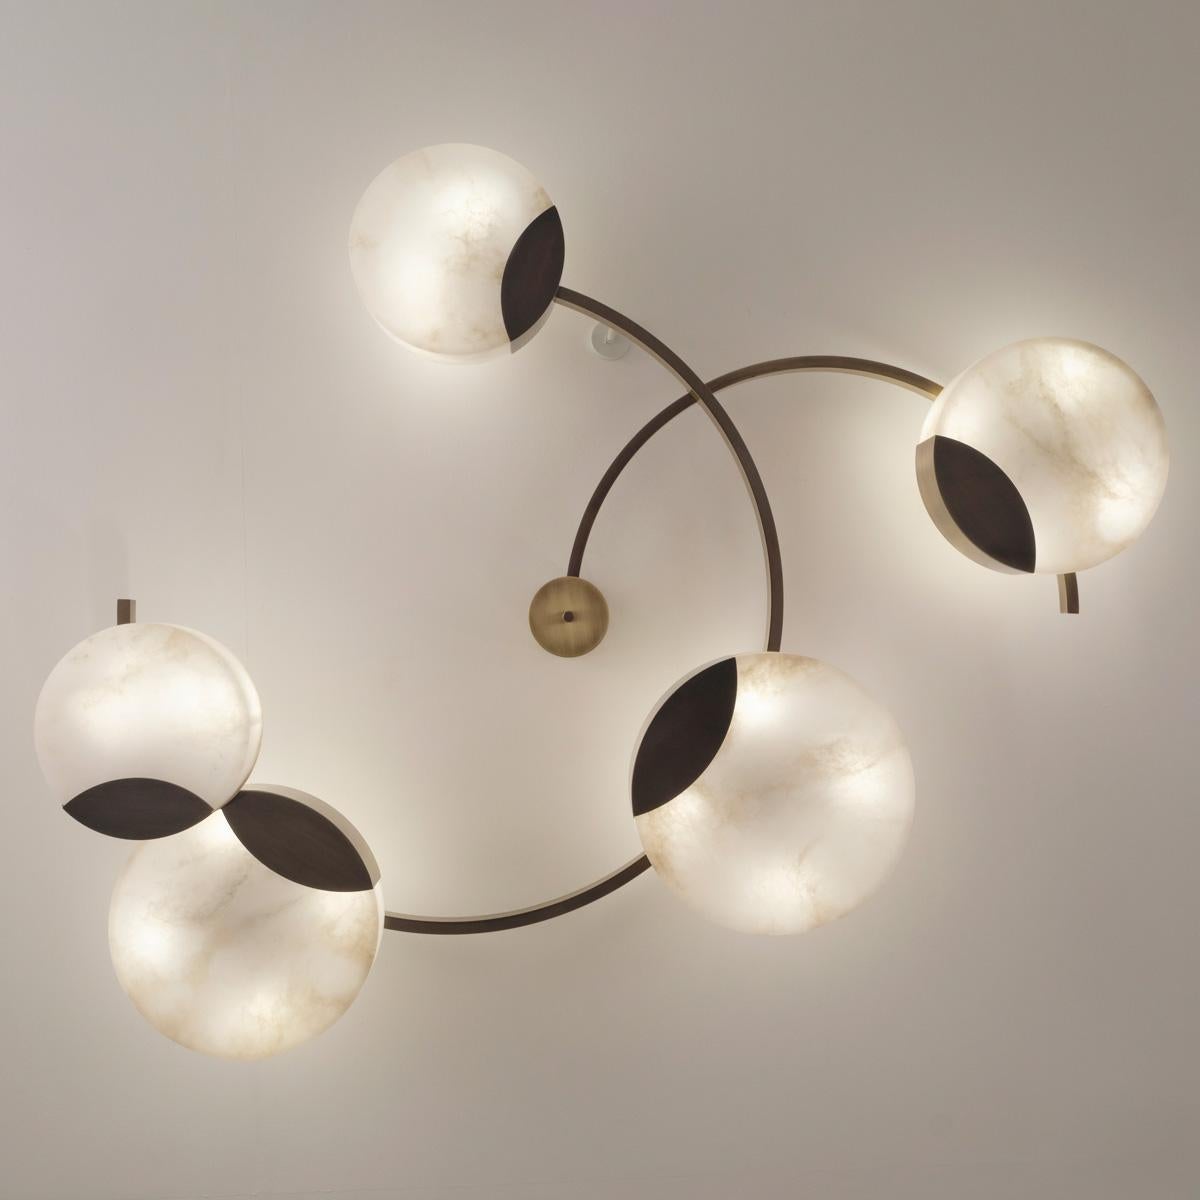 Cloud N.5 Ceiling Light by Gaspare Asaro-Satin Brass Finish In New Condition For Sale In New York, NY